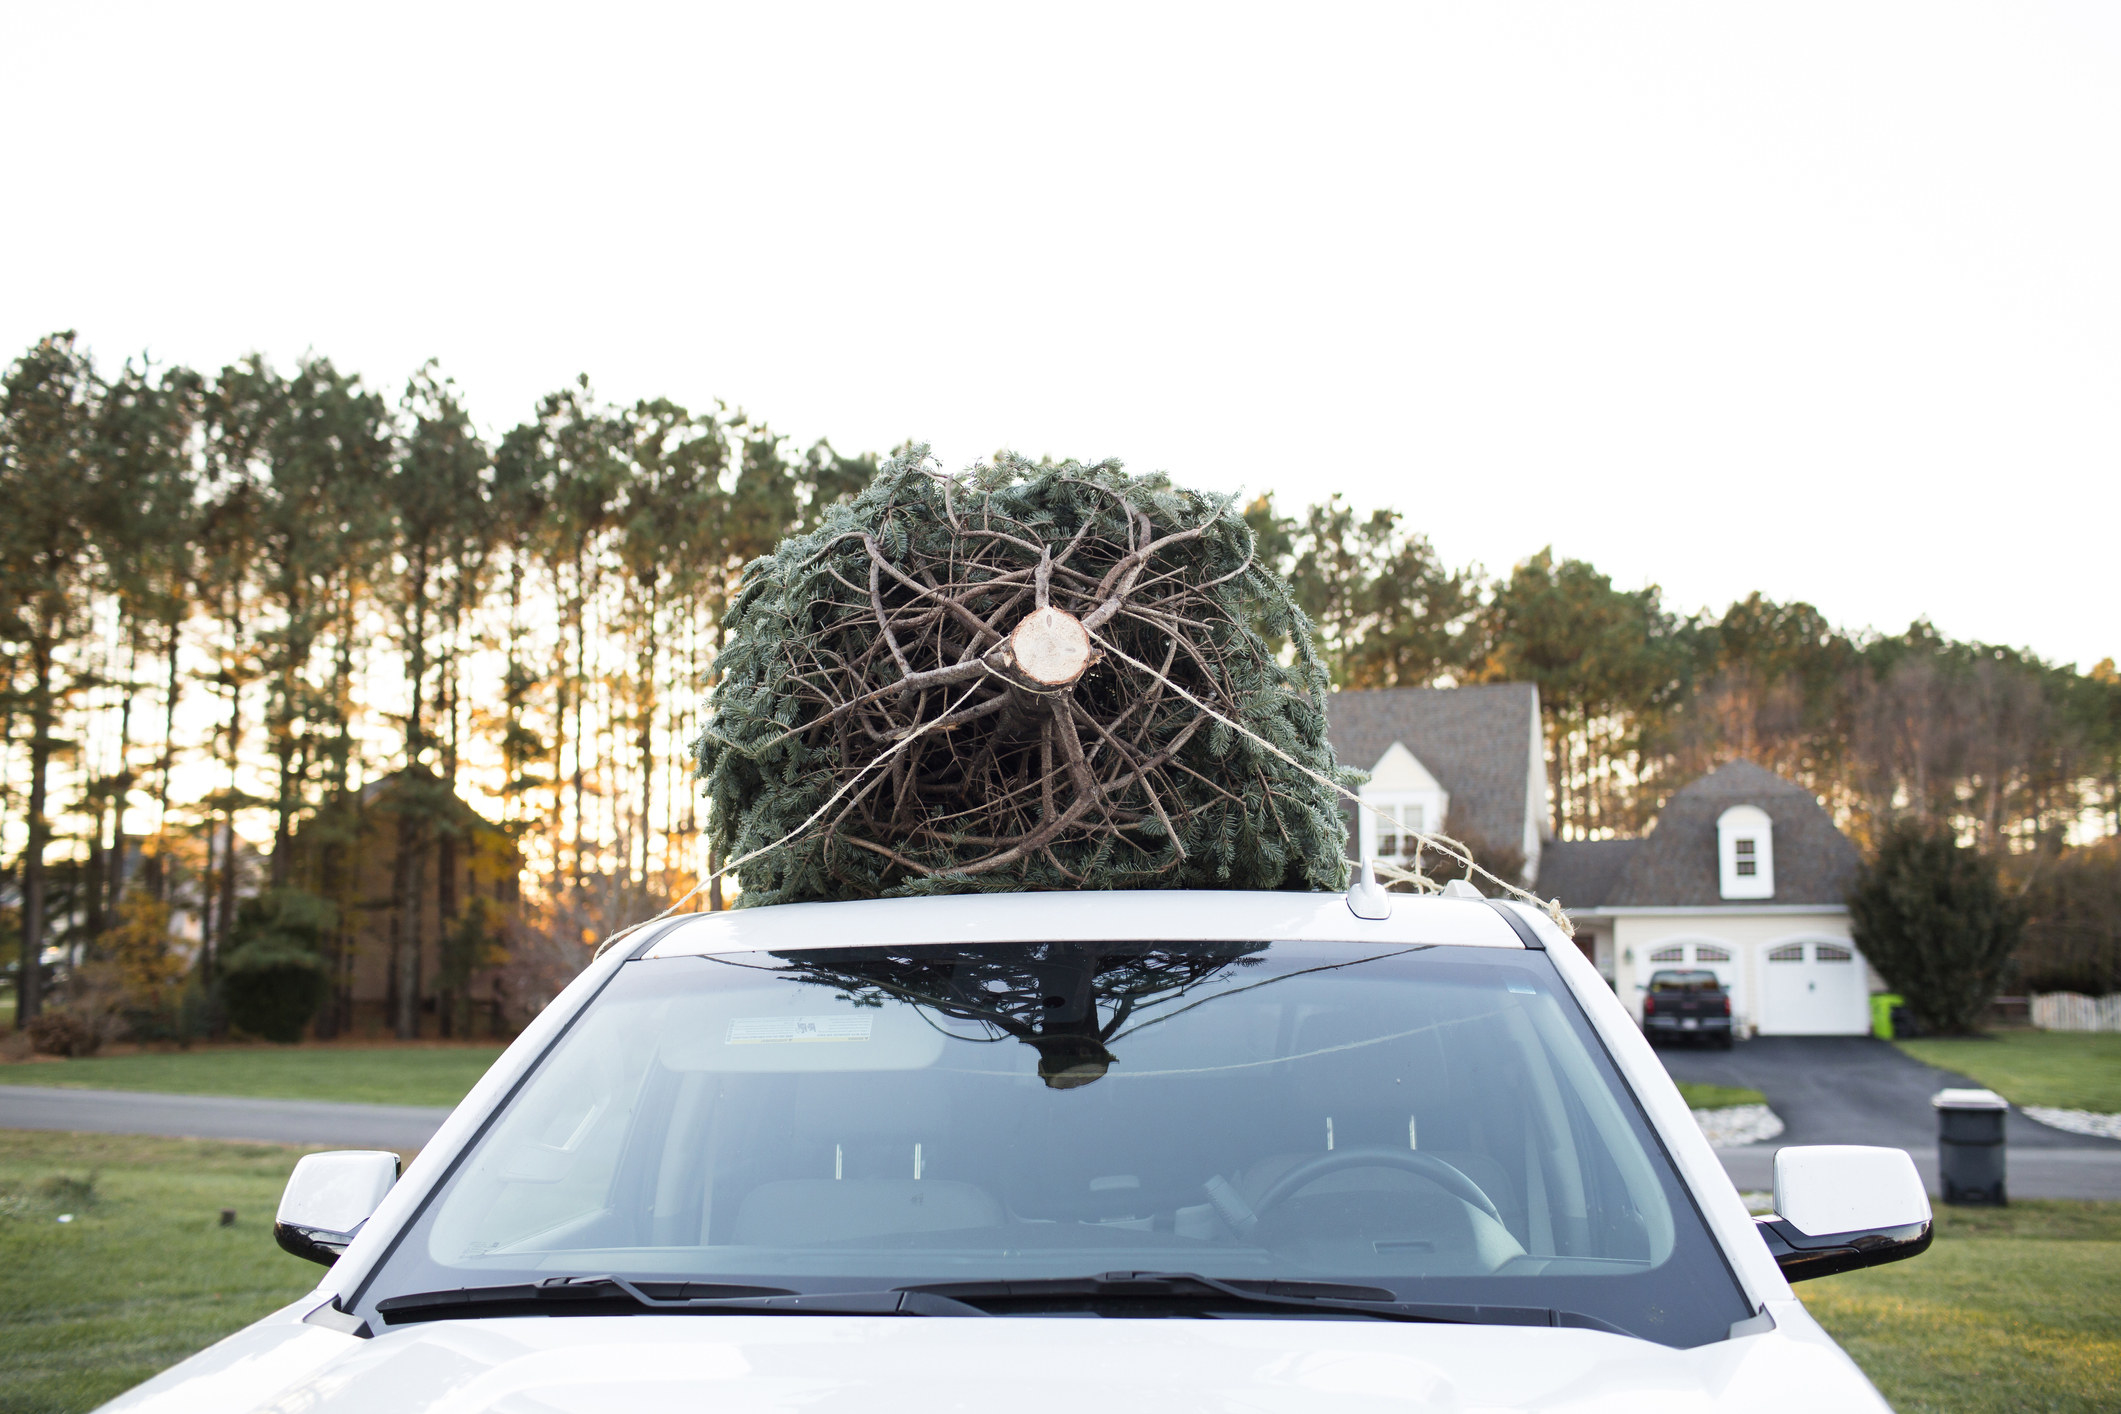 A Christmas tree strapped to the roof of a car.